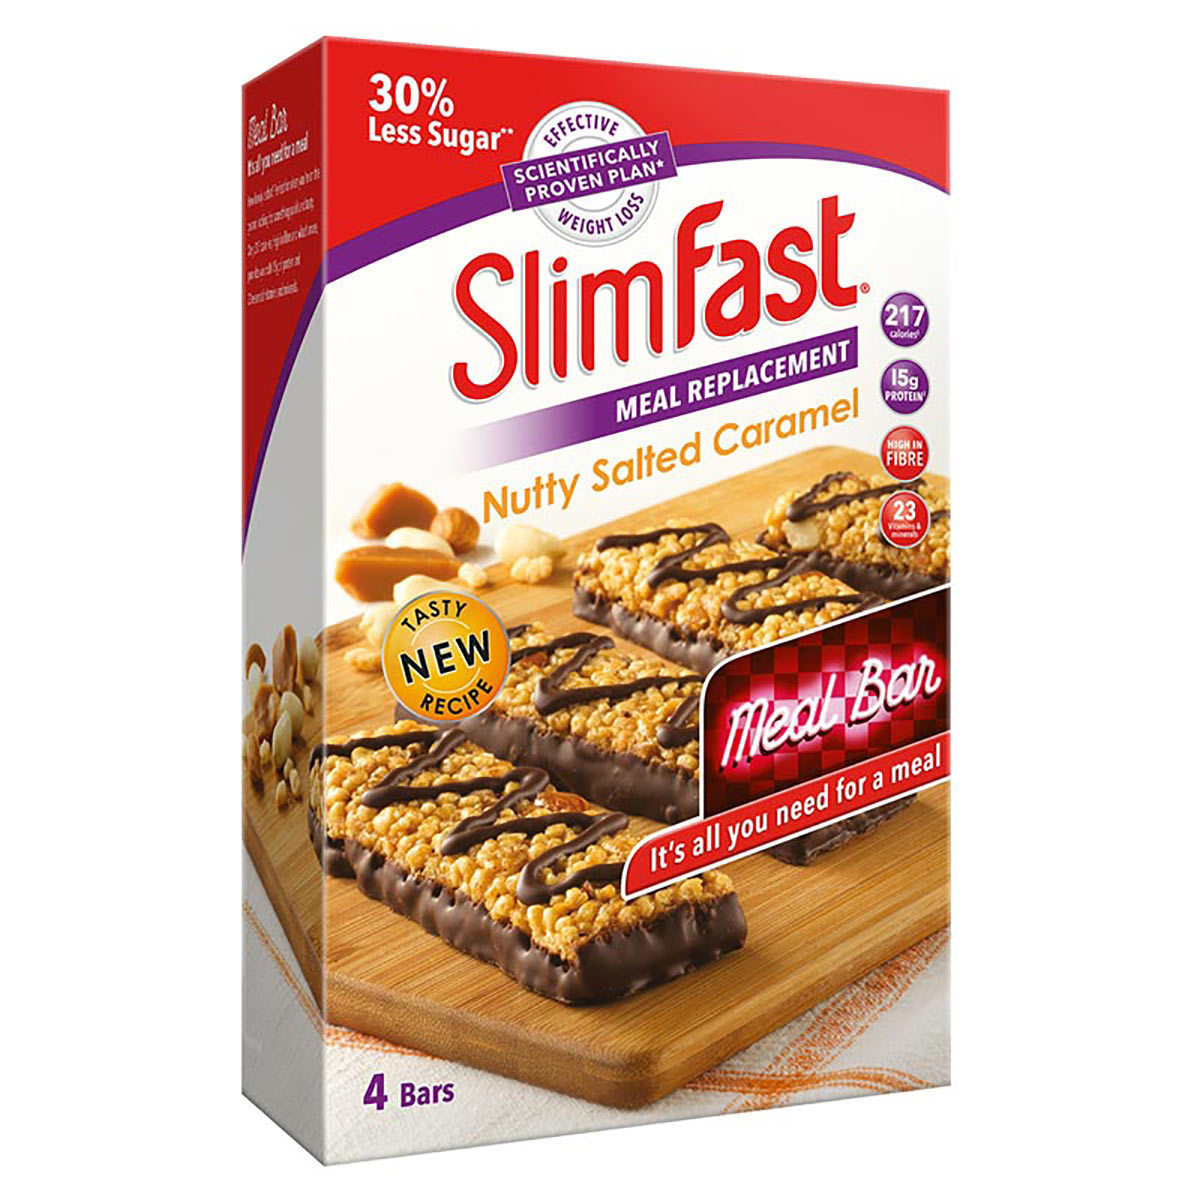 SlimFast Nutty Salted Caramel Meal Replacement Bars, 16 x 60g